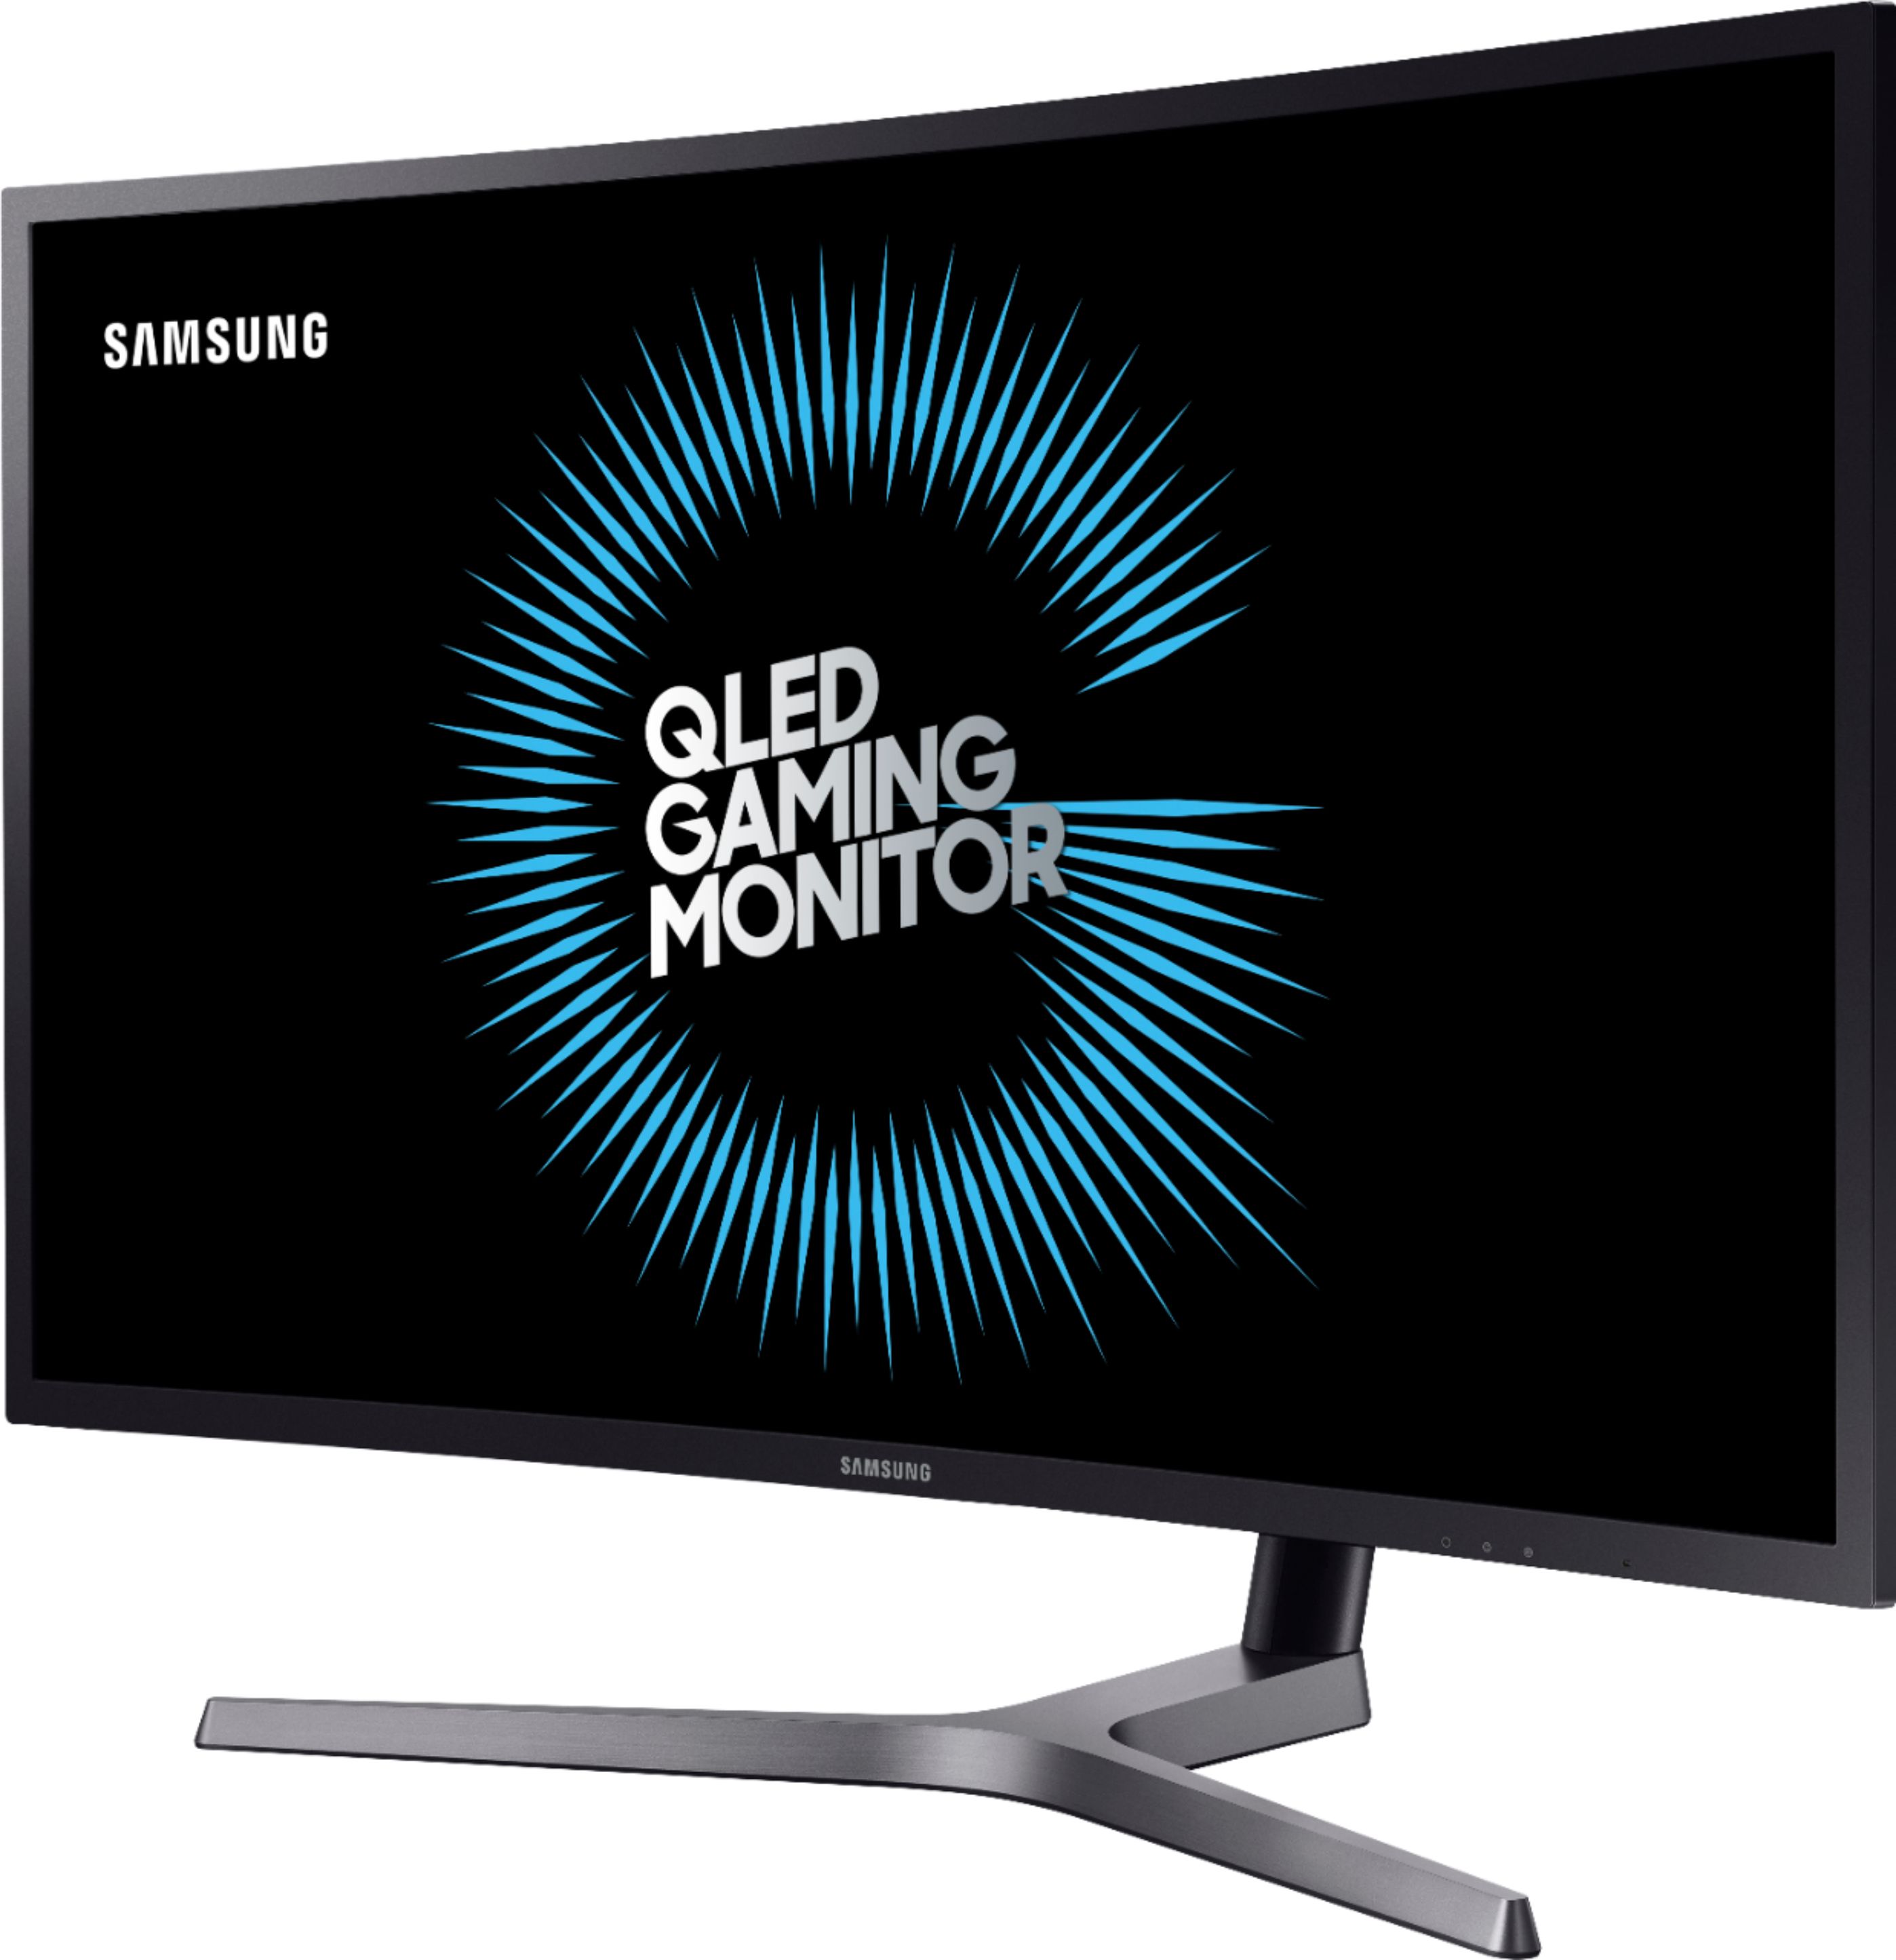 Left View: Samsung - Geek Squad Certified Refurbished 32" LED Curved QHD FreeSync Monitor with HDR - Matte Dark Blue/Gray